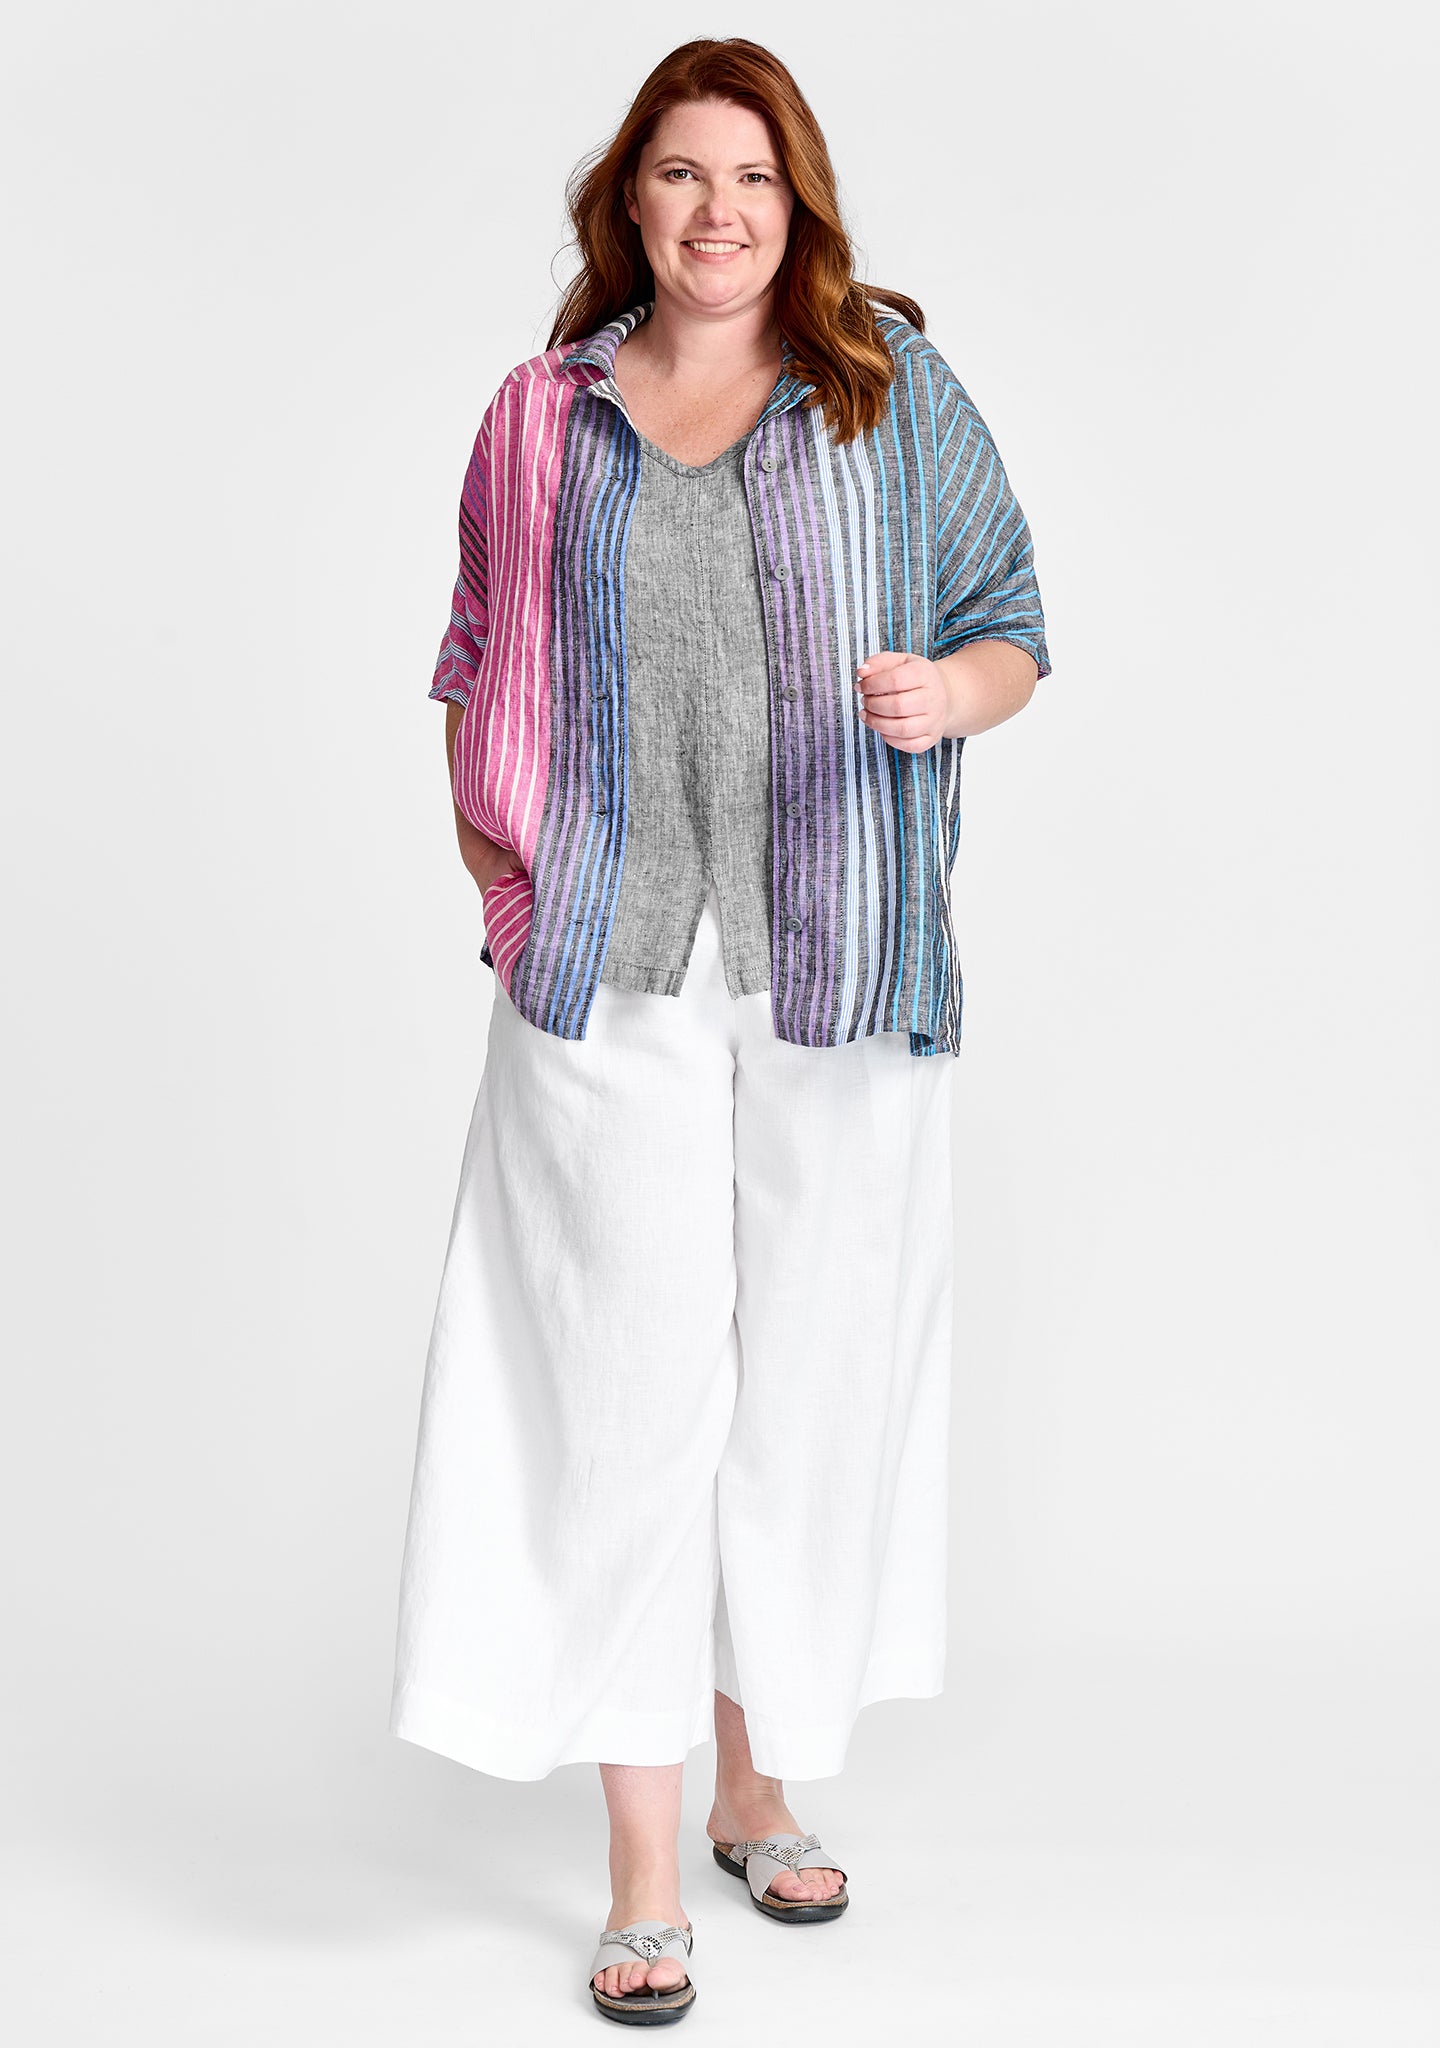 FLAX linen shirt in stripe with linen tank in grey and linen pants in white